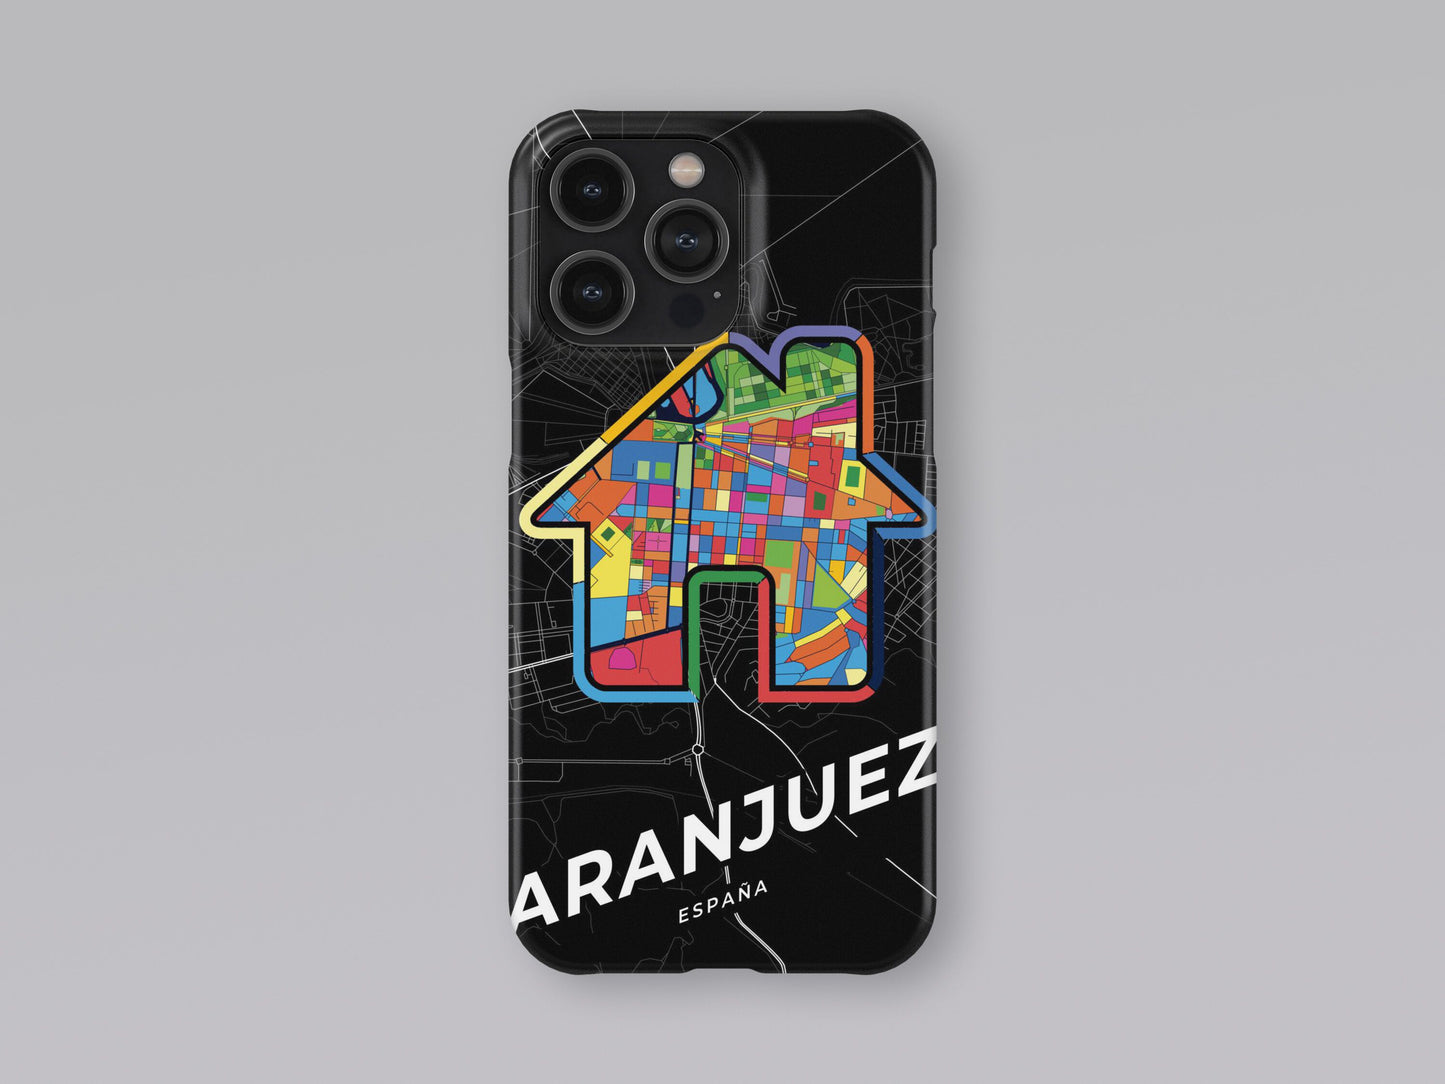 Aranjuez Spain slim phone case with colorful icon. Birthday, wedding or housewarming gift. Couple match cases. 3